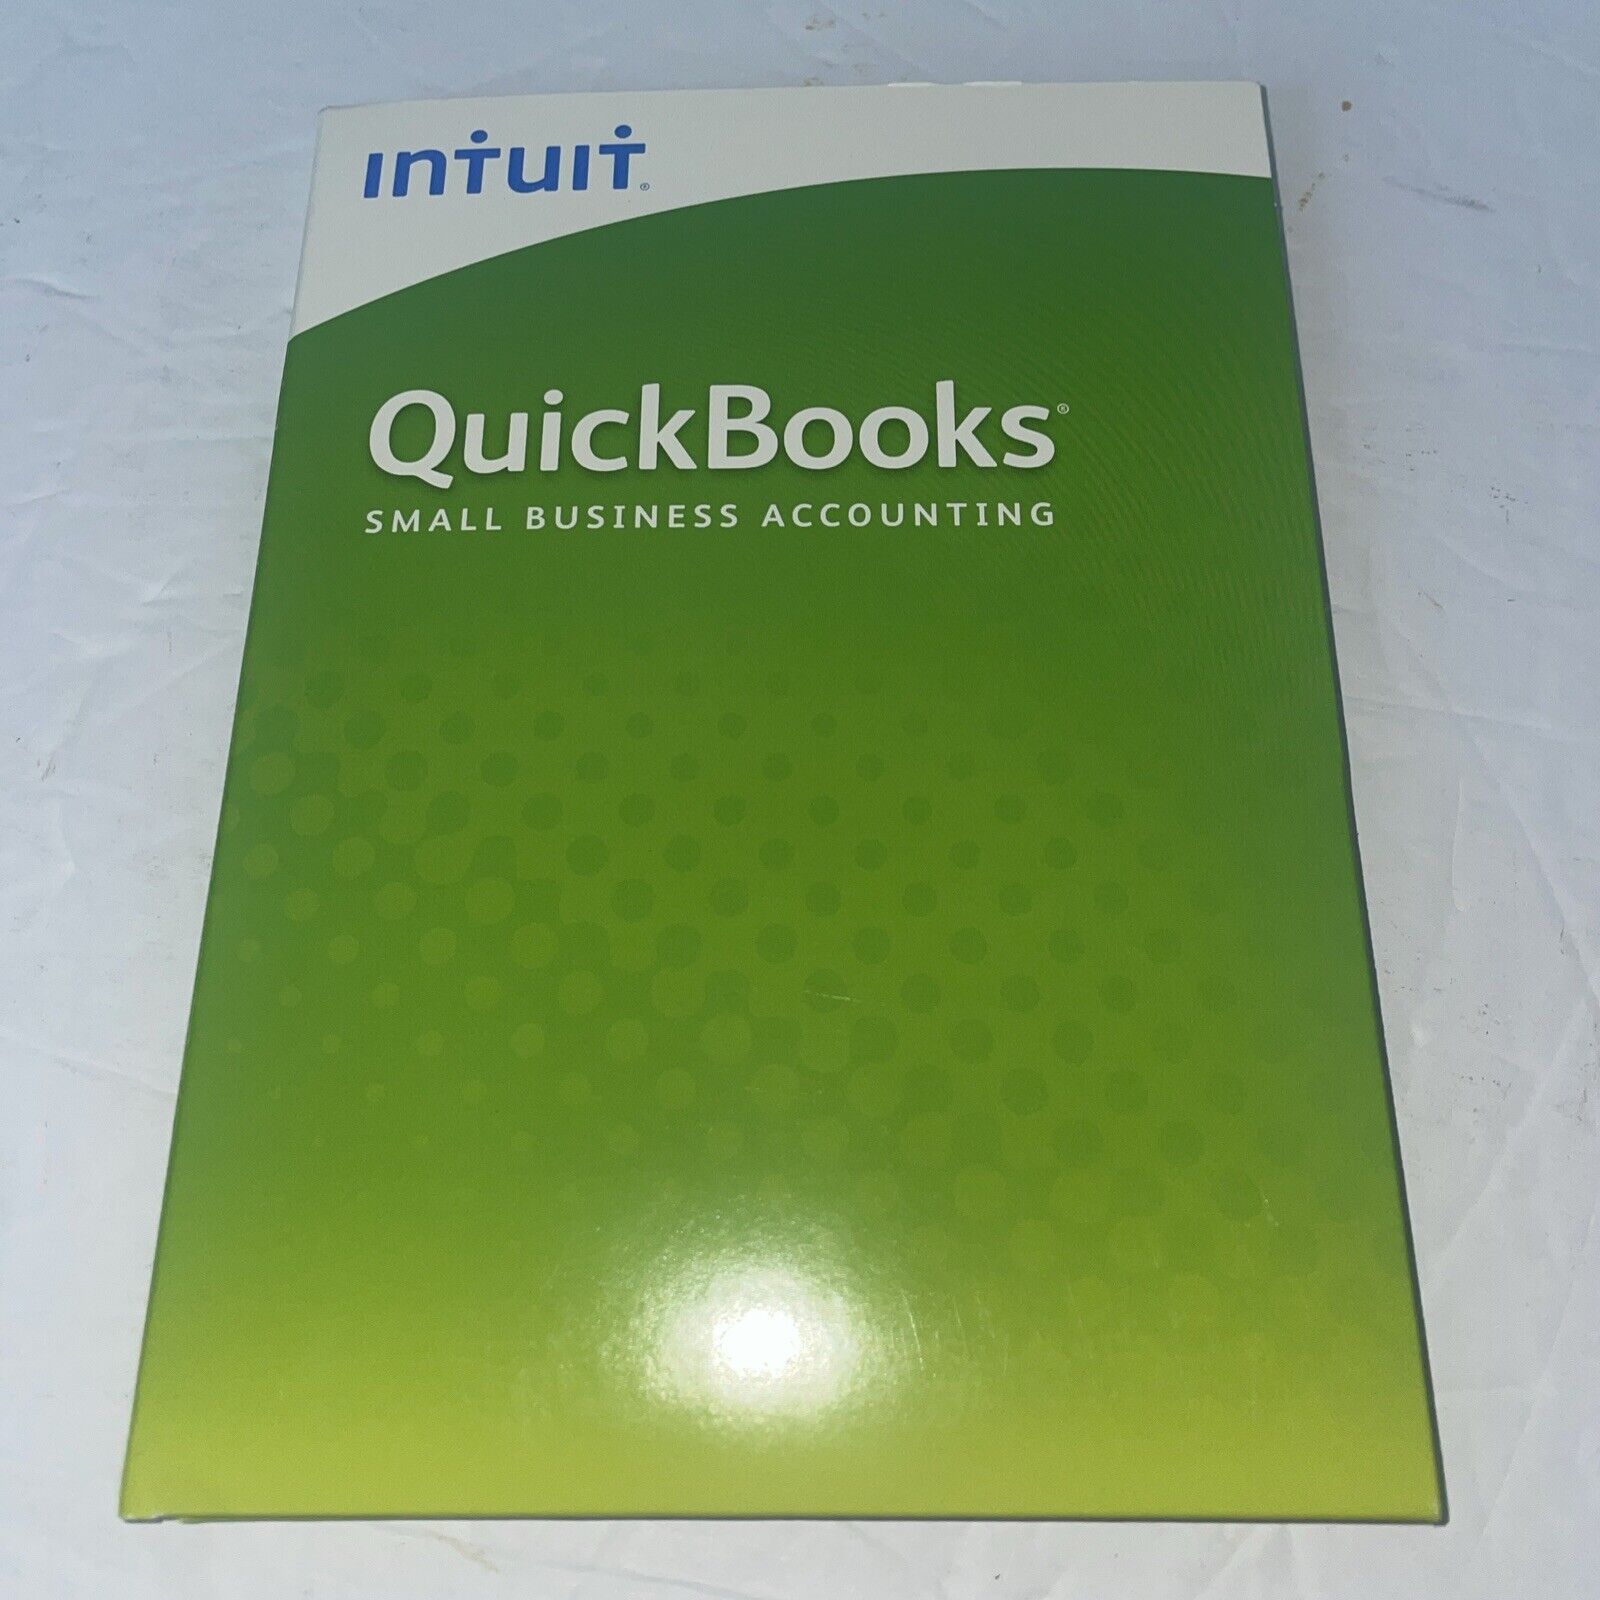 Intuit QuickBooks Pro 2012 Small Business Accounting Software Windows 7 w/Key